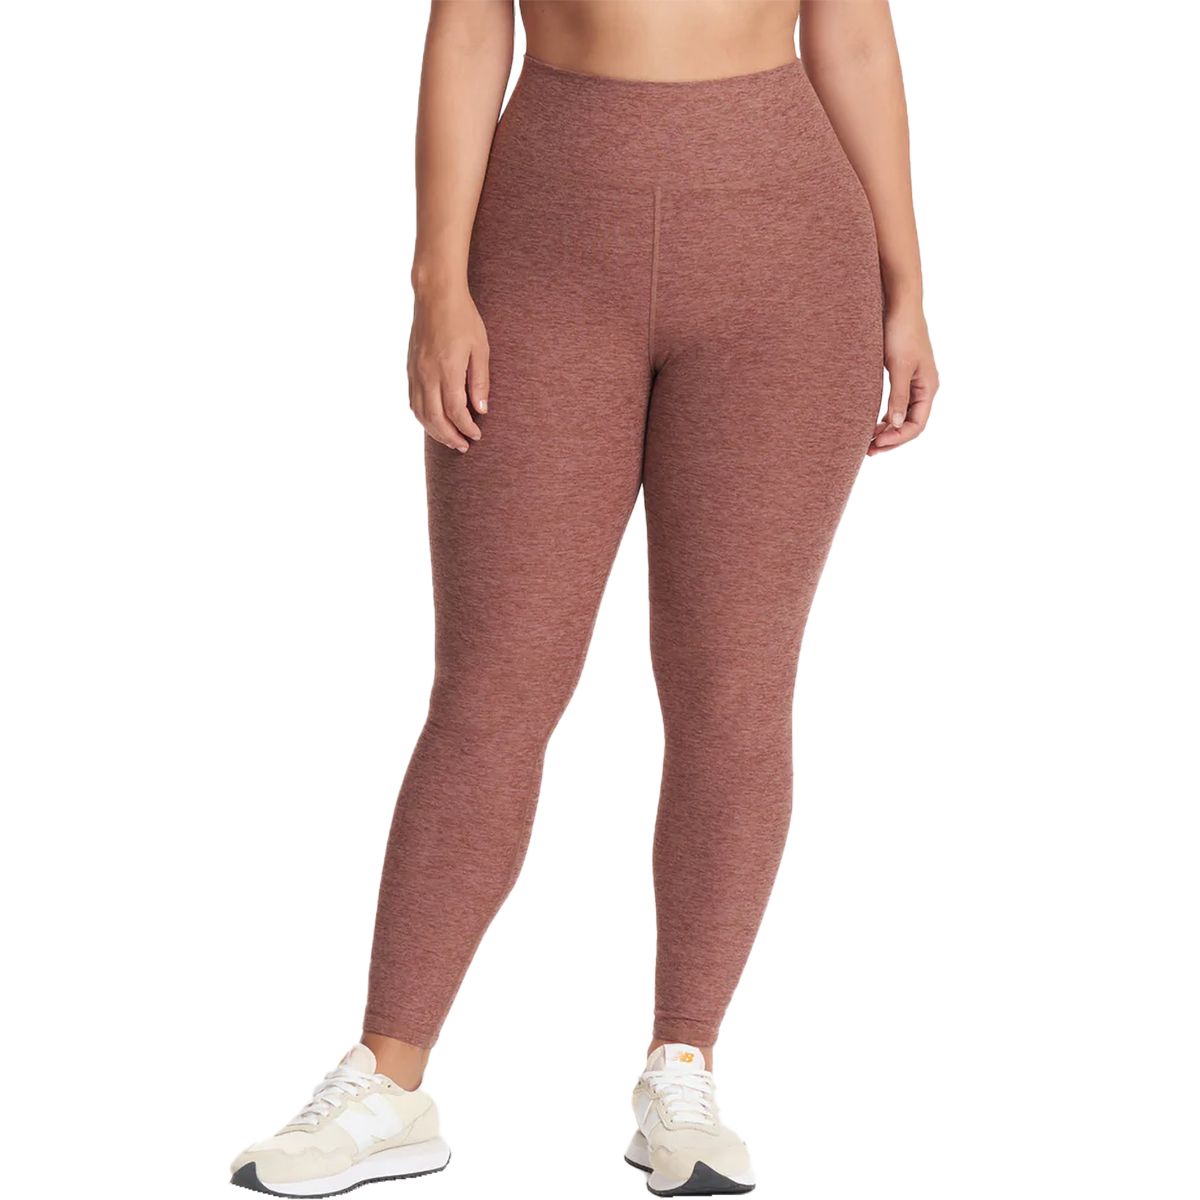 The North Face Elevation Crop Legging - Women's